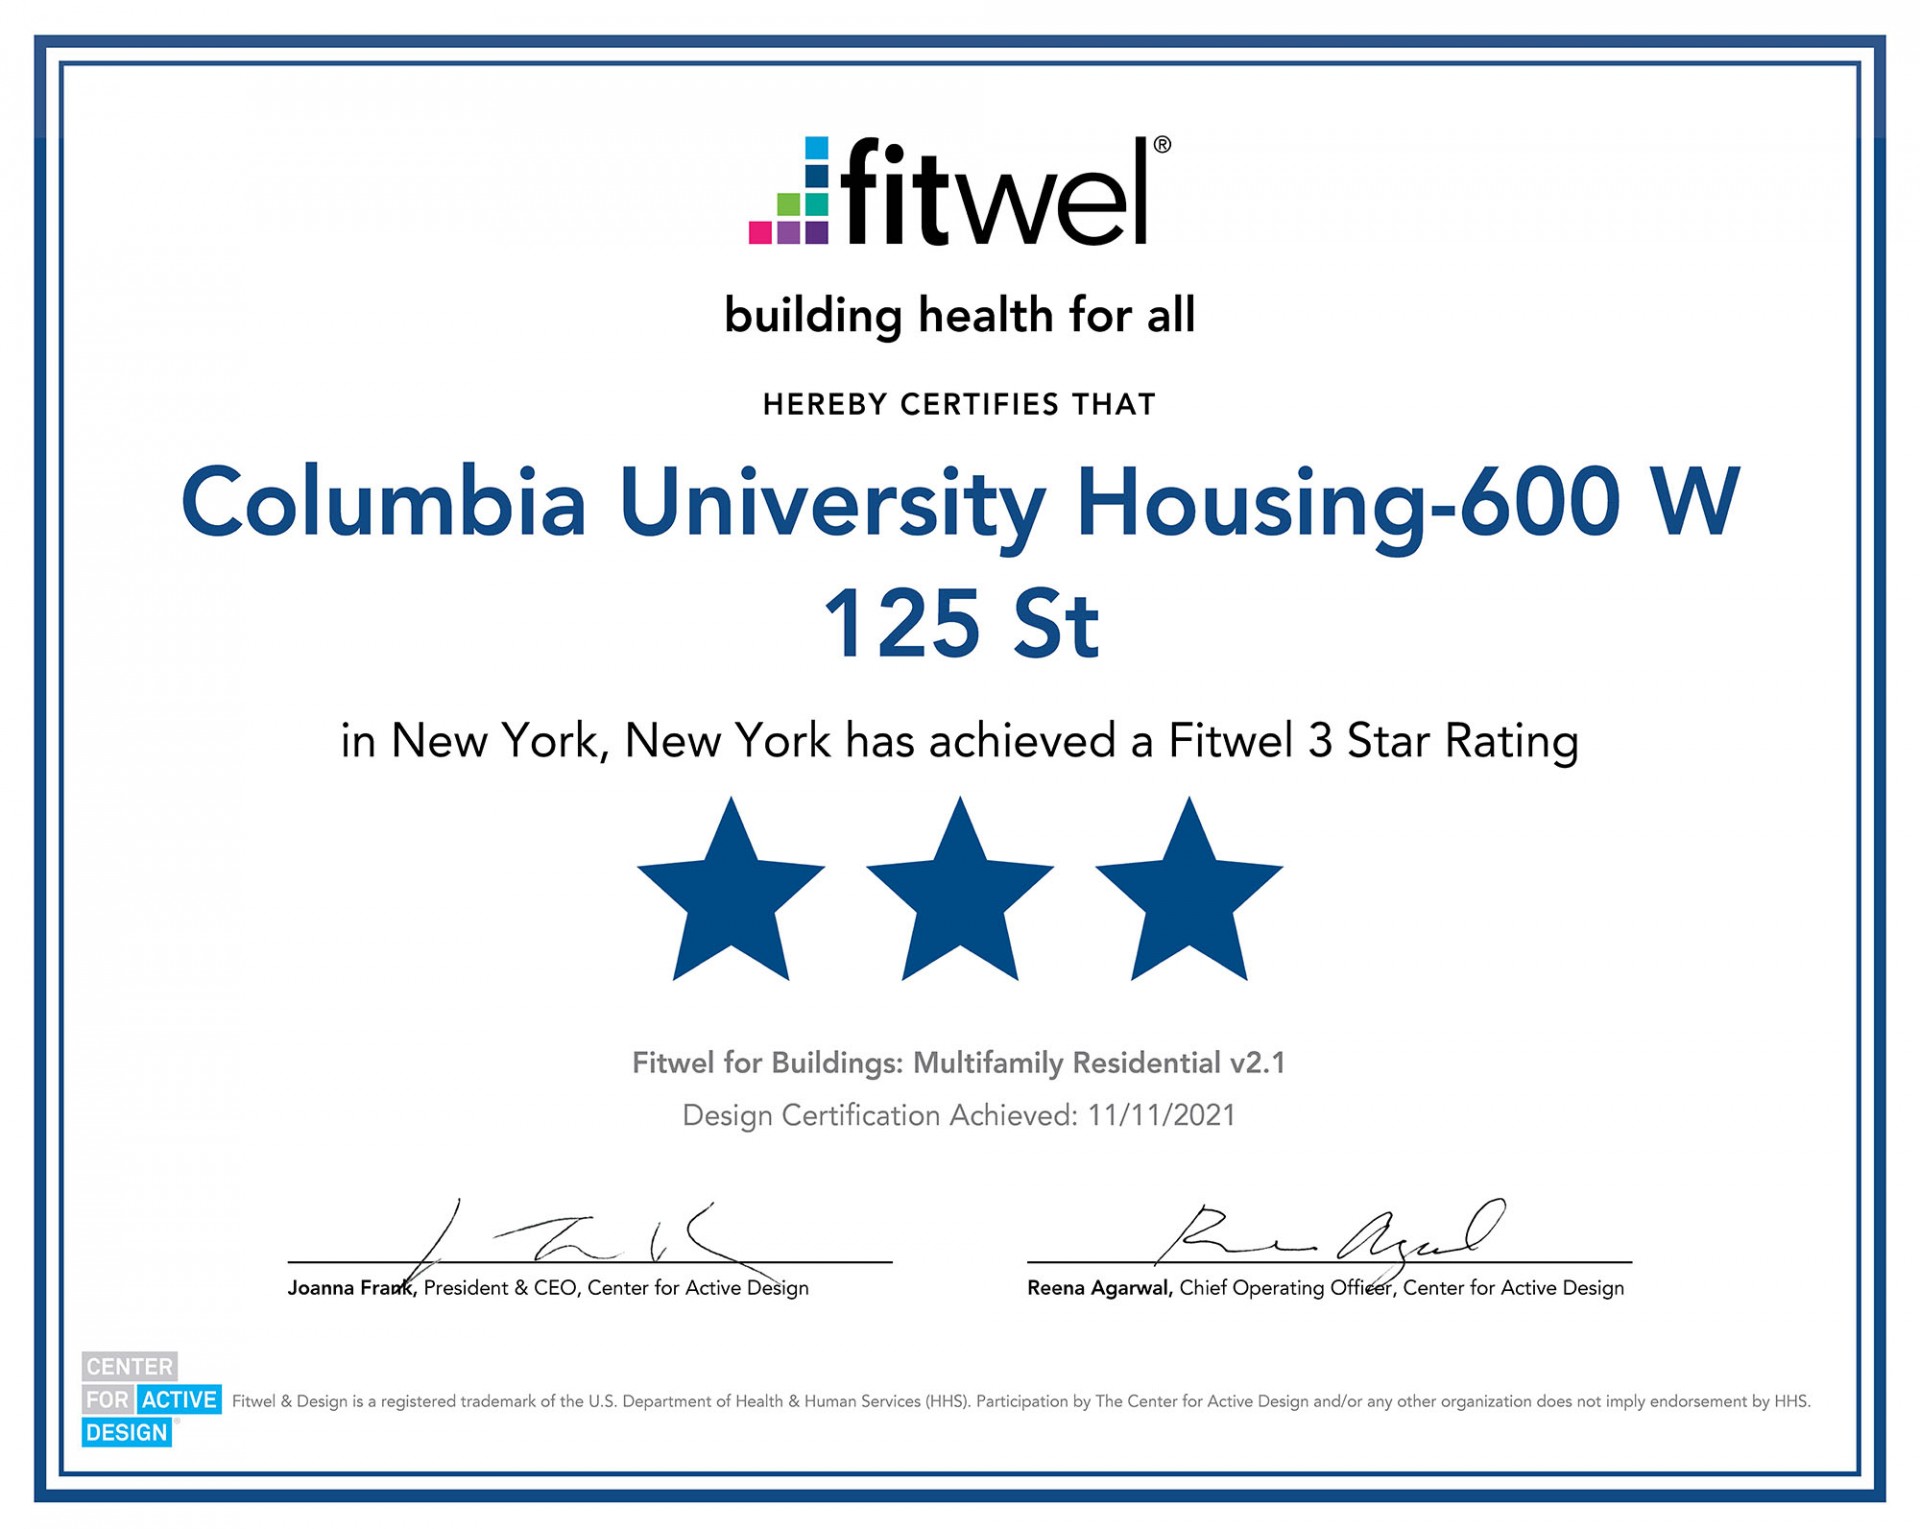 Fitwel building health for all hereby certifies that Columbia University Housing 600 W 125 St has achieved a Fitwel 3 Star Rating